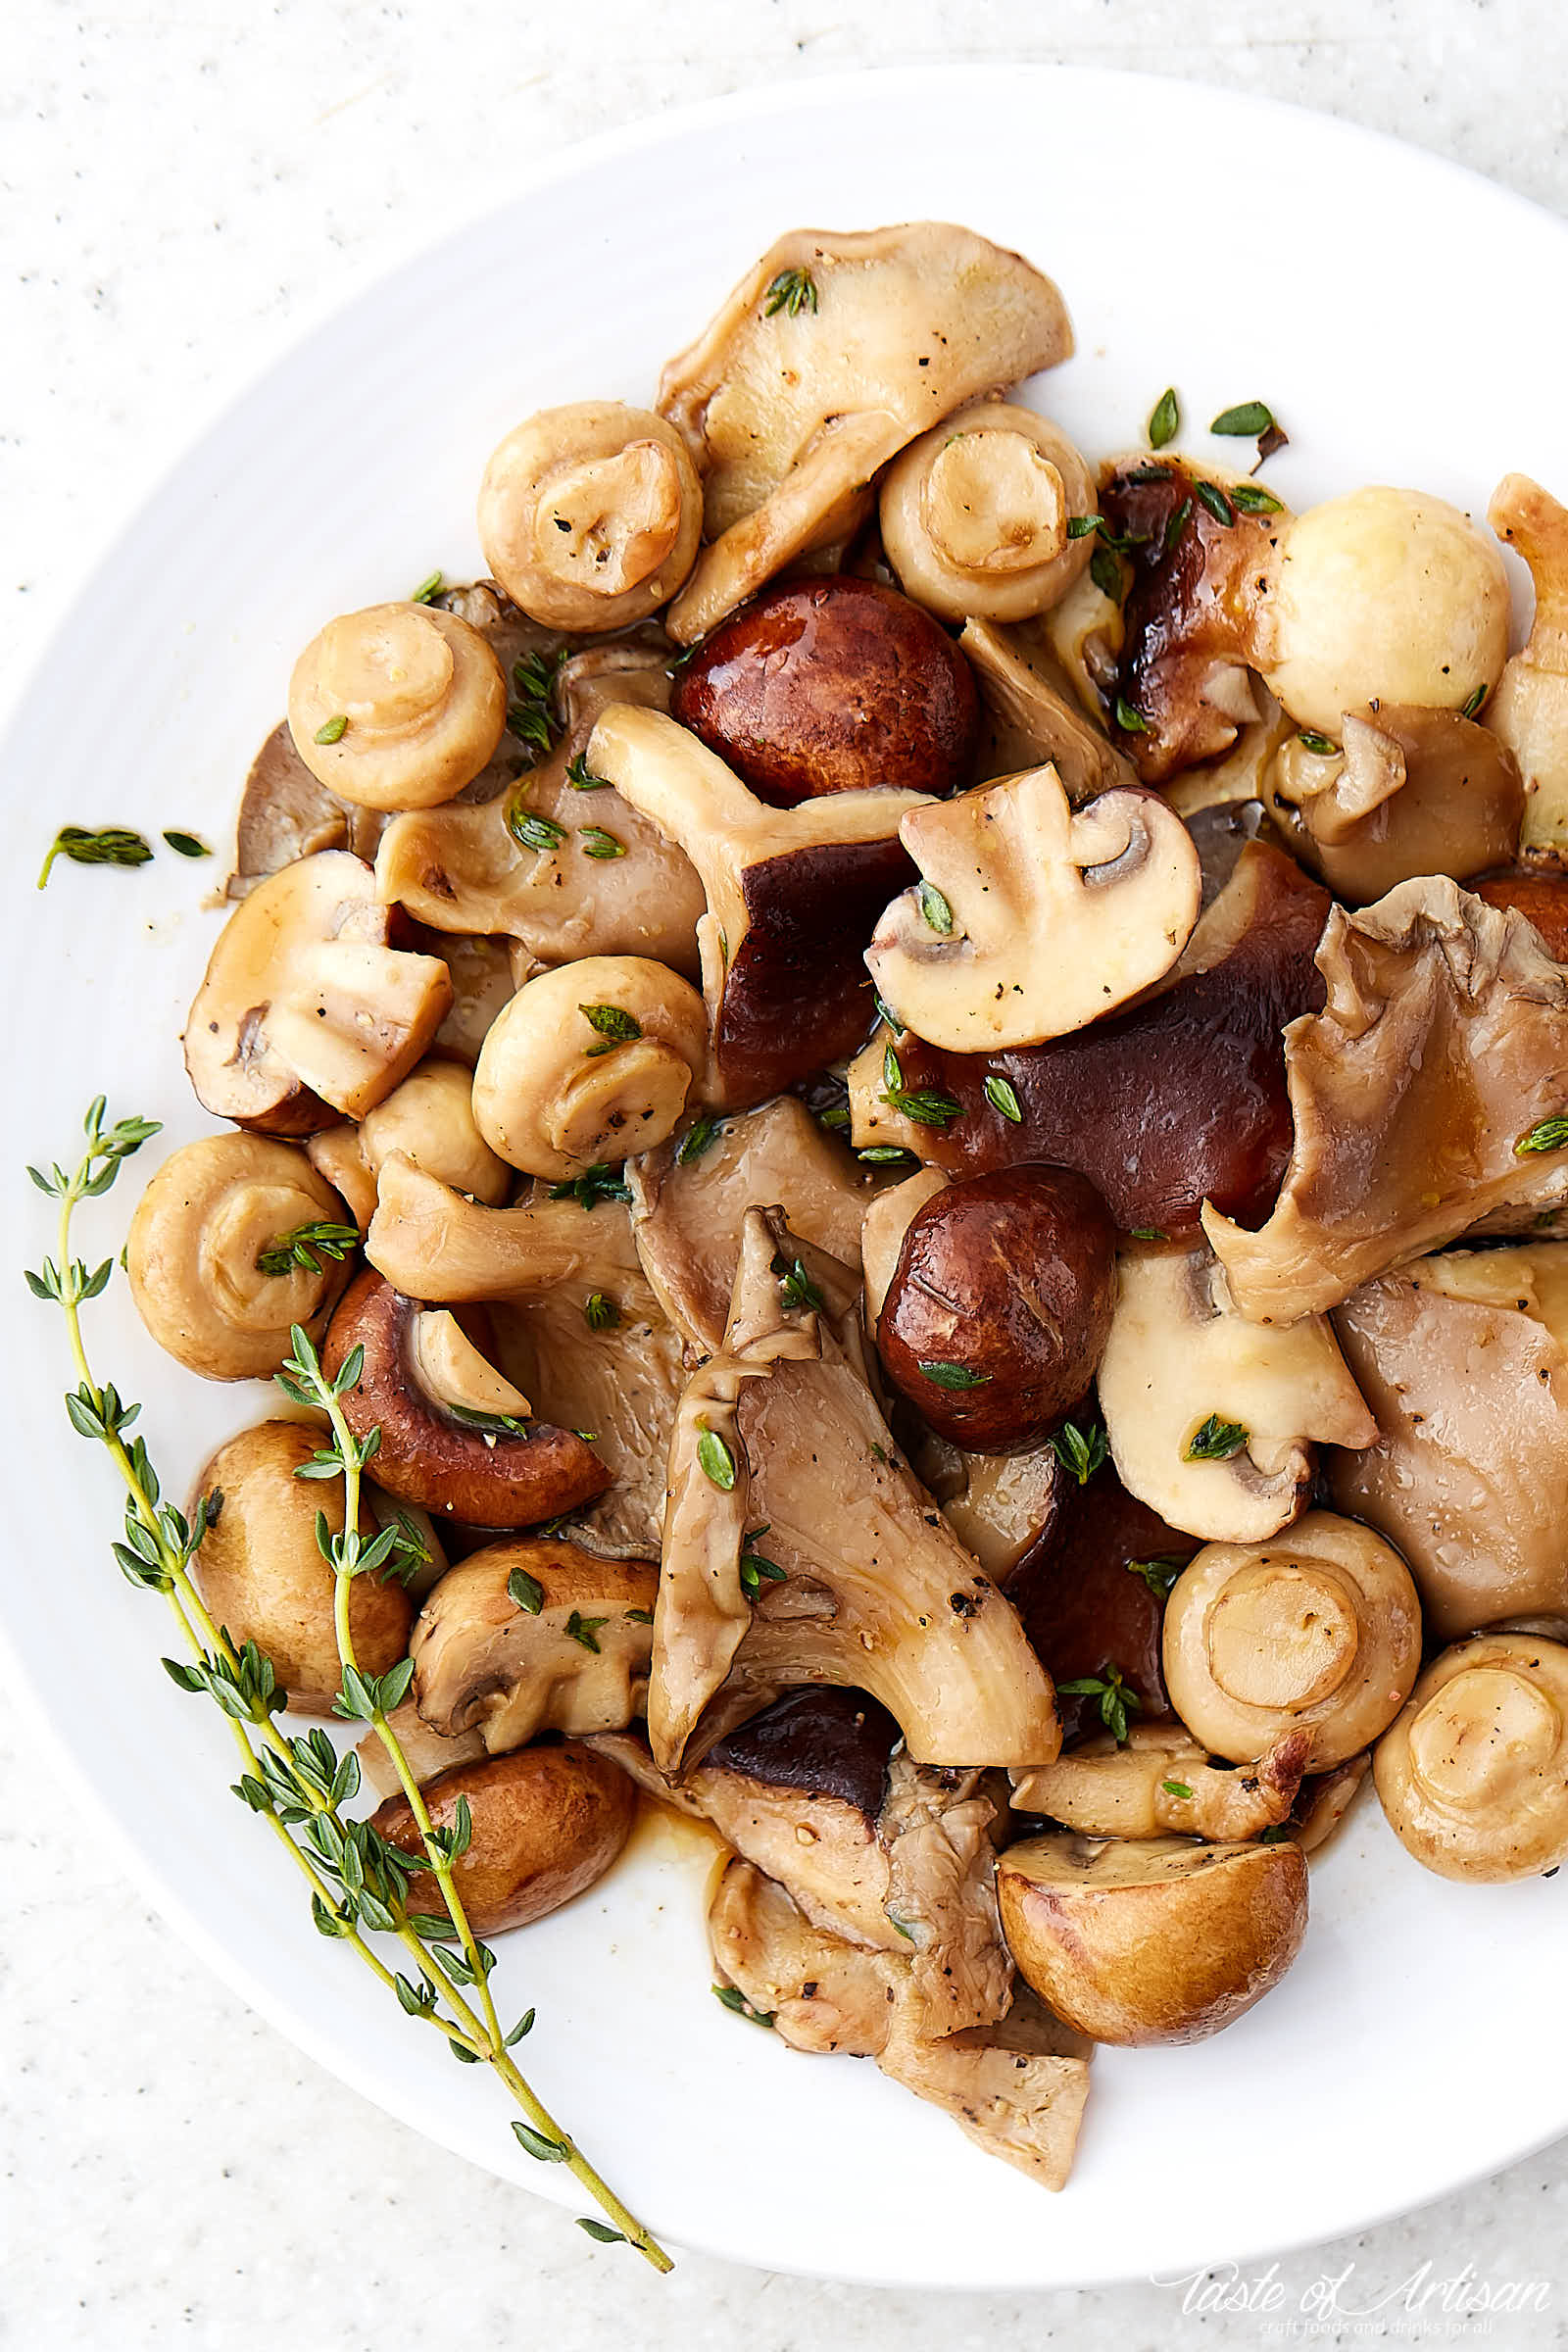 Sous Vide Mushrooms - quick and easy to make, packed with flavor and are a pure delight to eat. Excellent with steaks, scrambled eggs, sauces and more. | Taste of Artisan